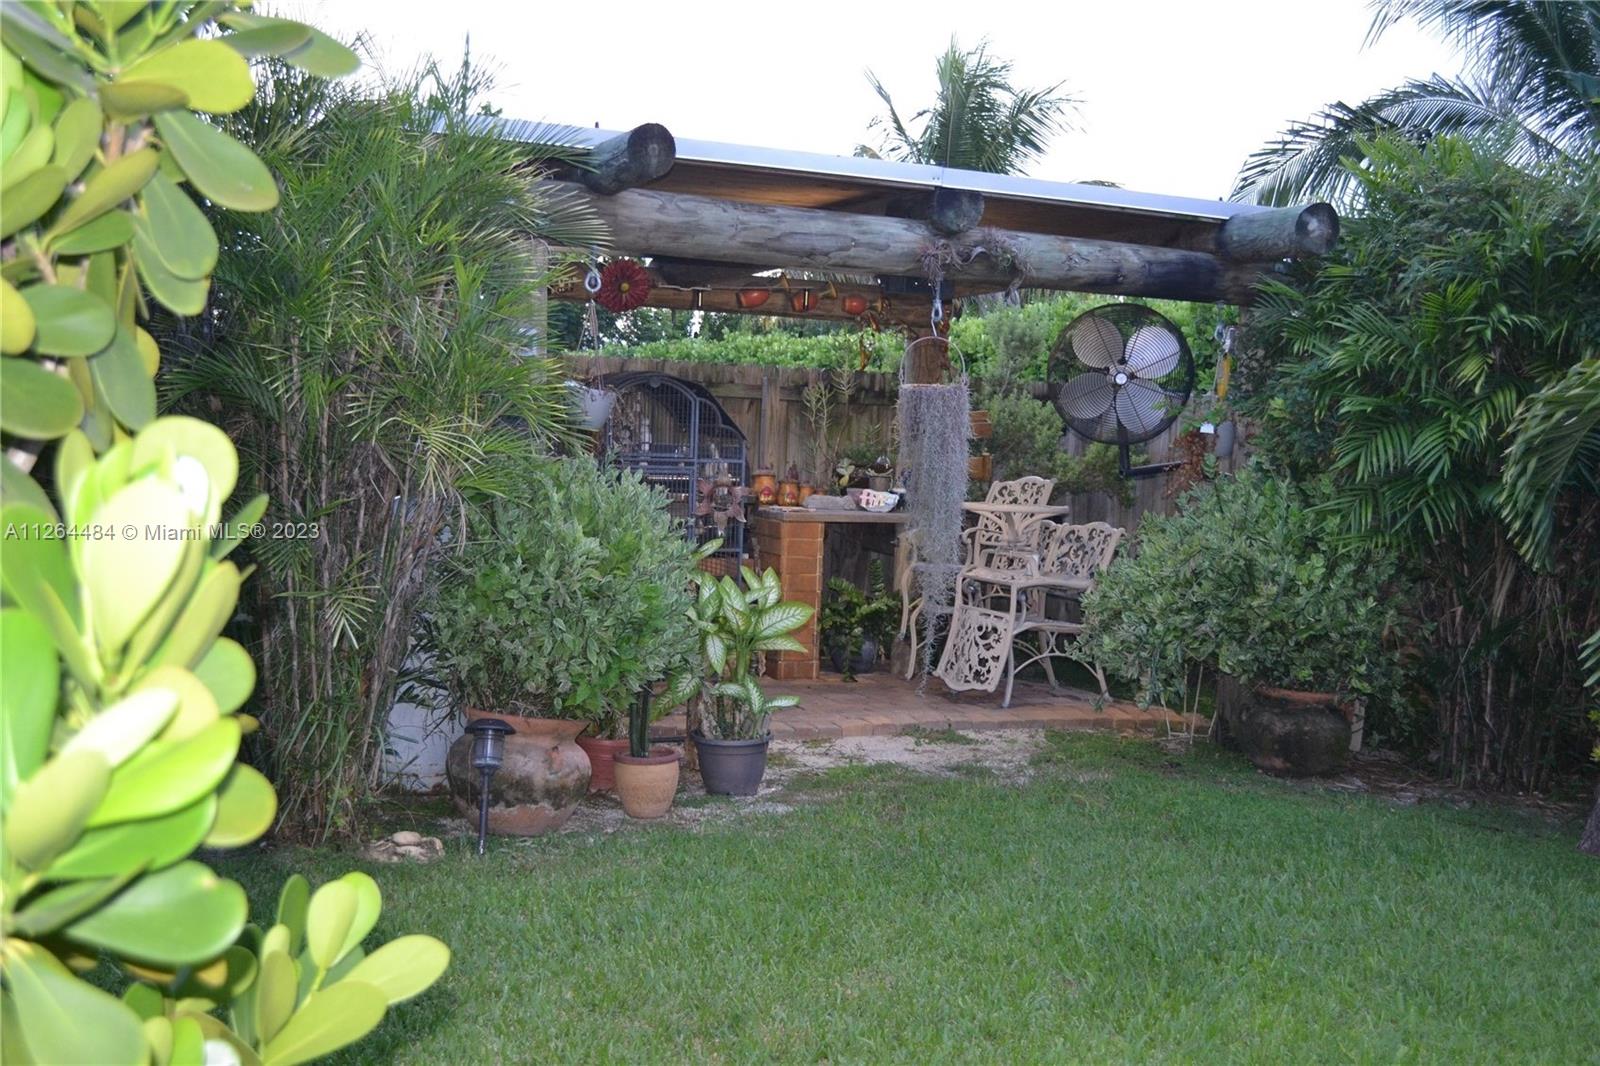 Tiki/Barbecue area. Big fan not included in the sale.